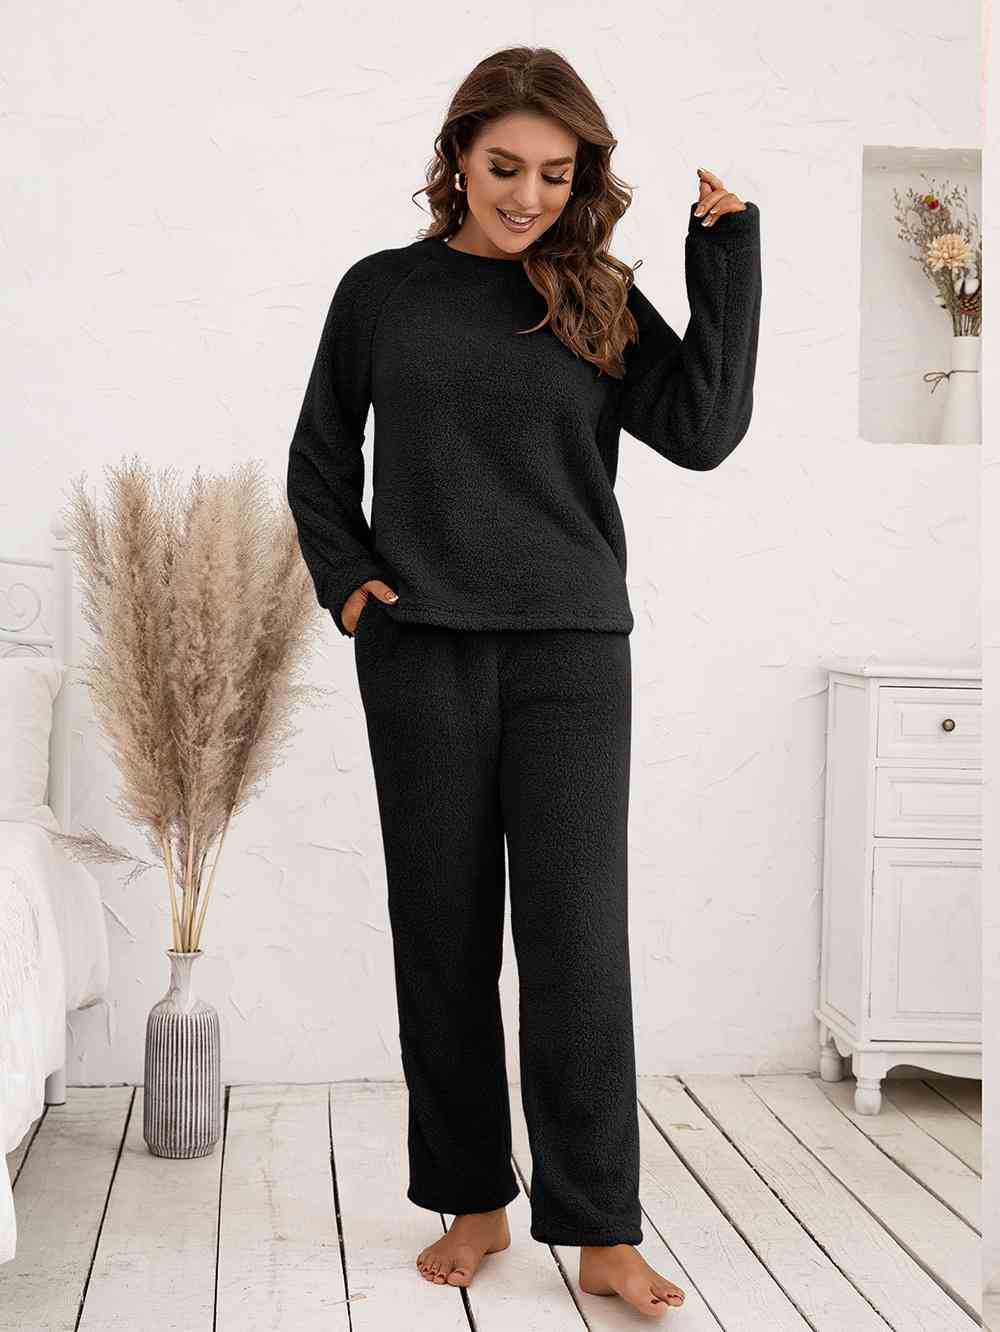 Teddy Long Sleeve Top and Pants Lounge Set (9 Colors) Loungewear Krazy Heart Designs Boutique Black S 